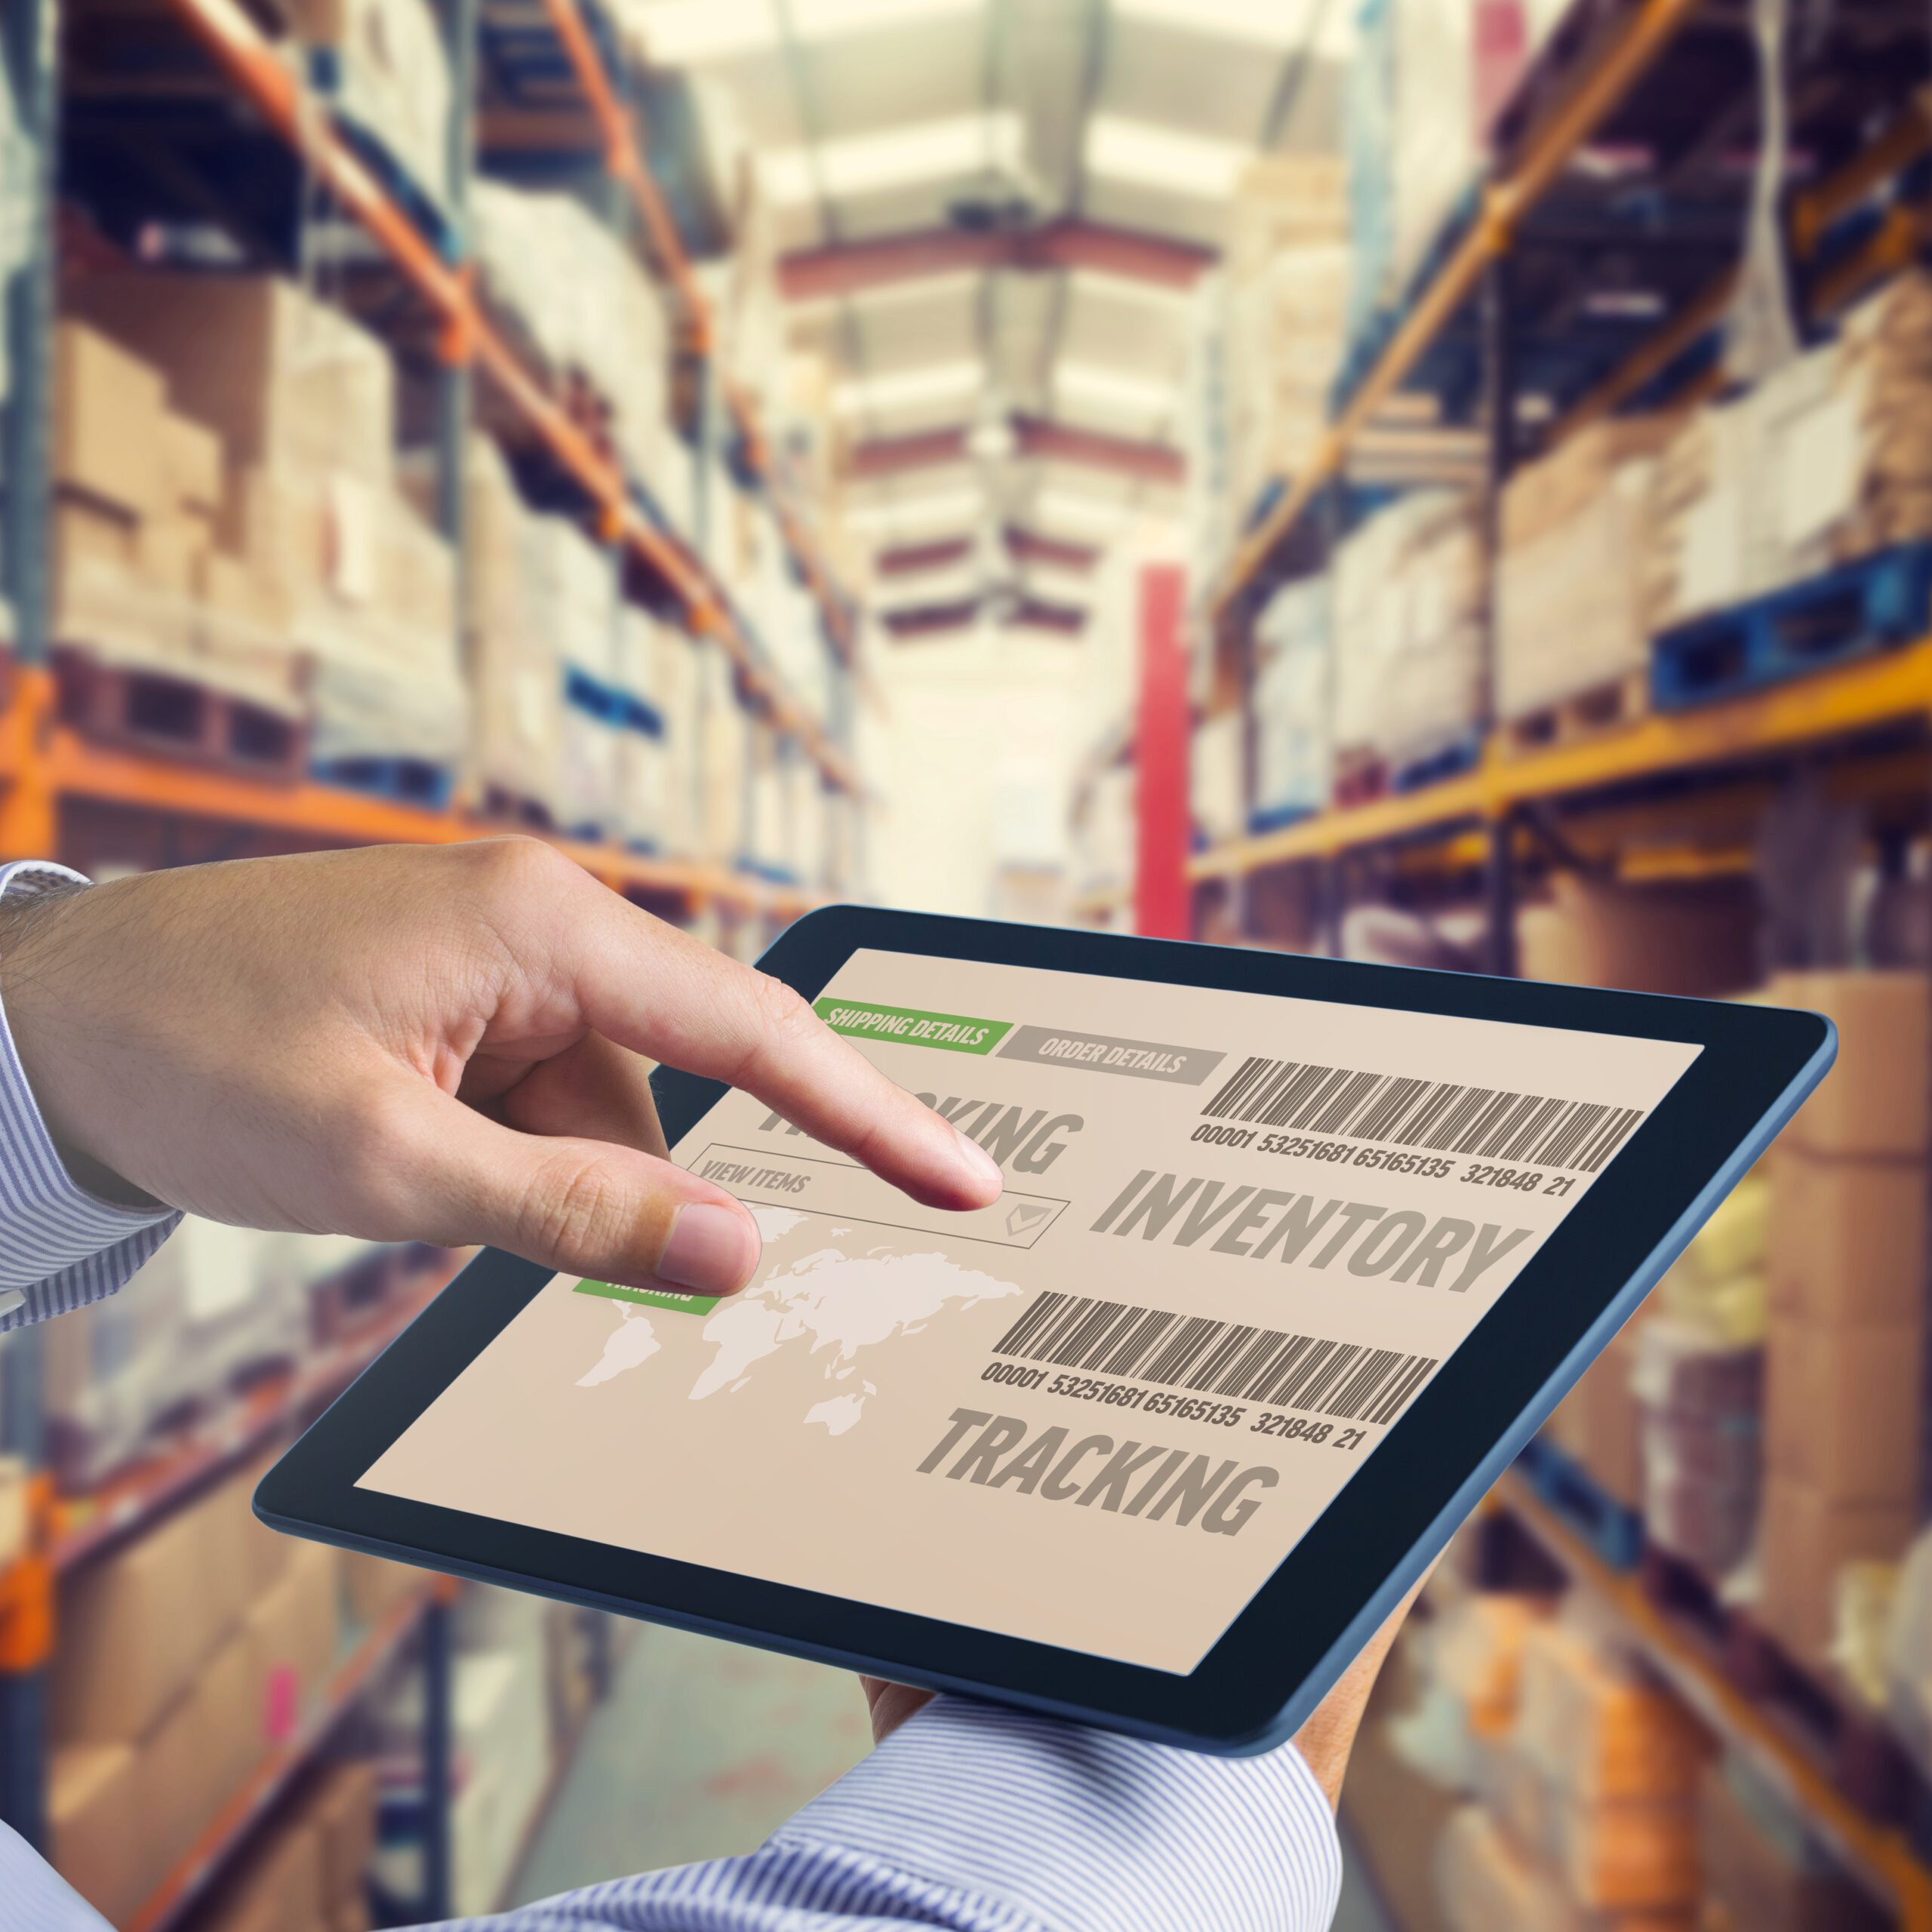 IoT Systems Benefit Inventory Management